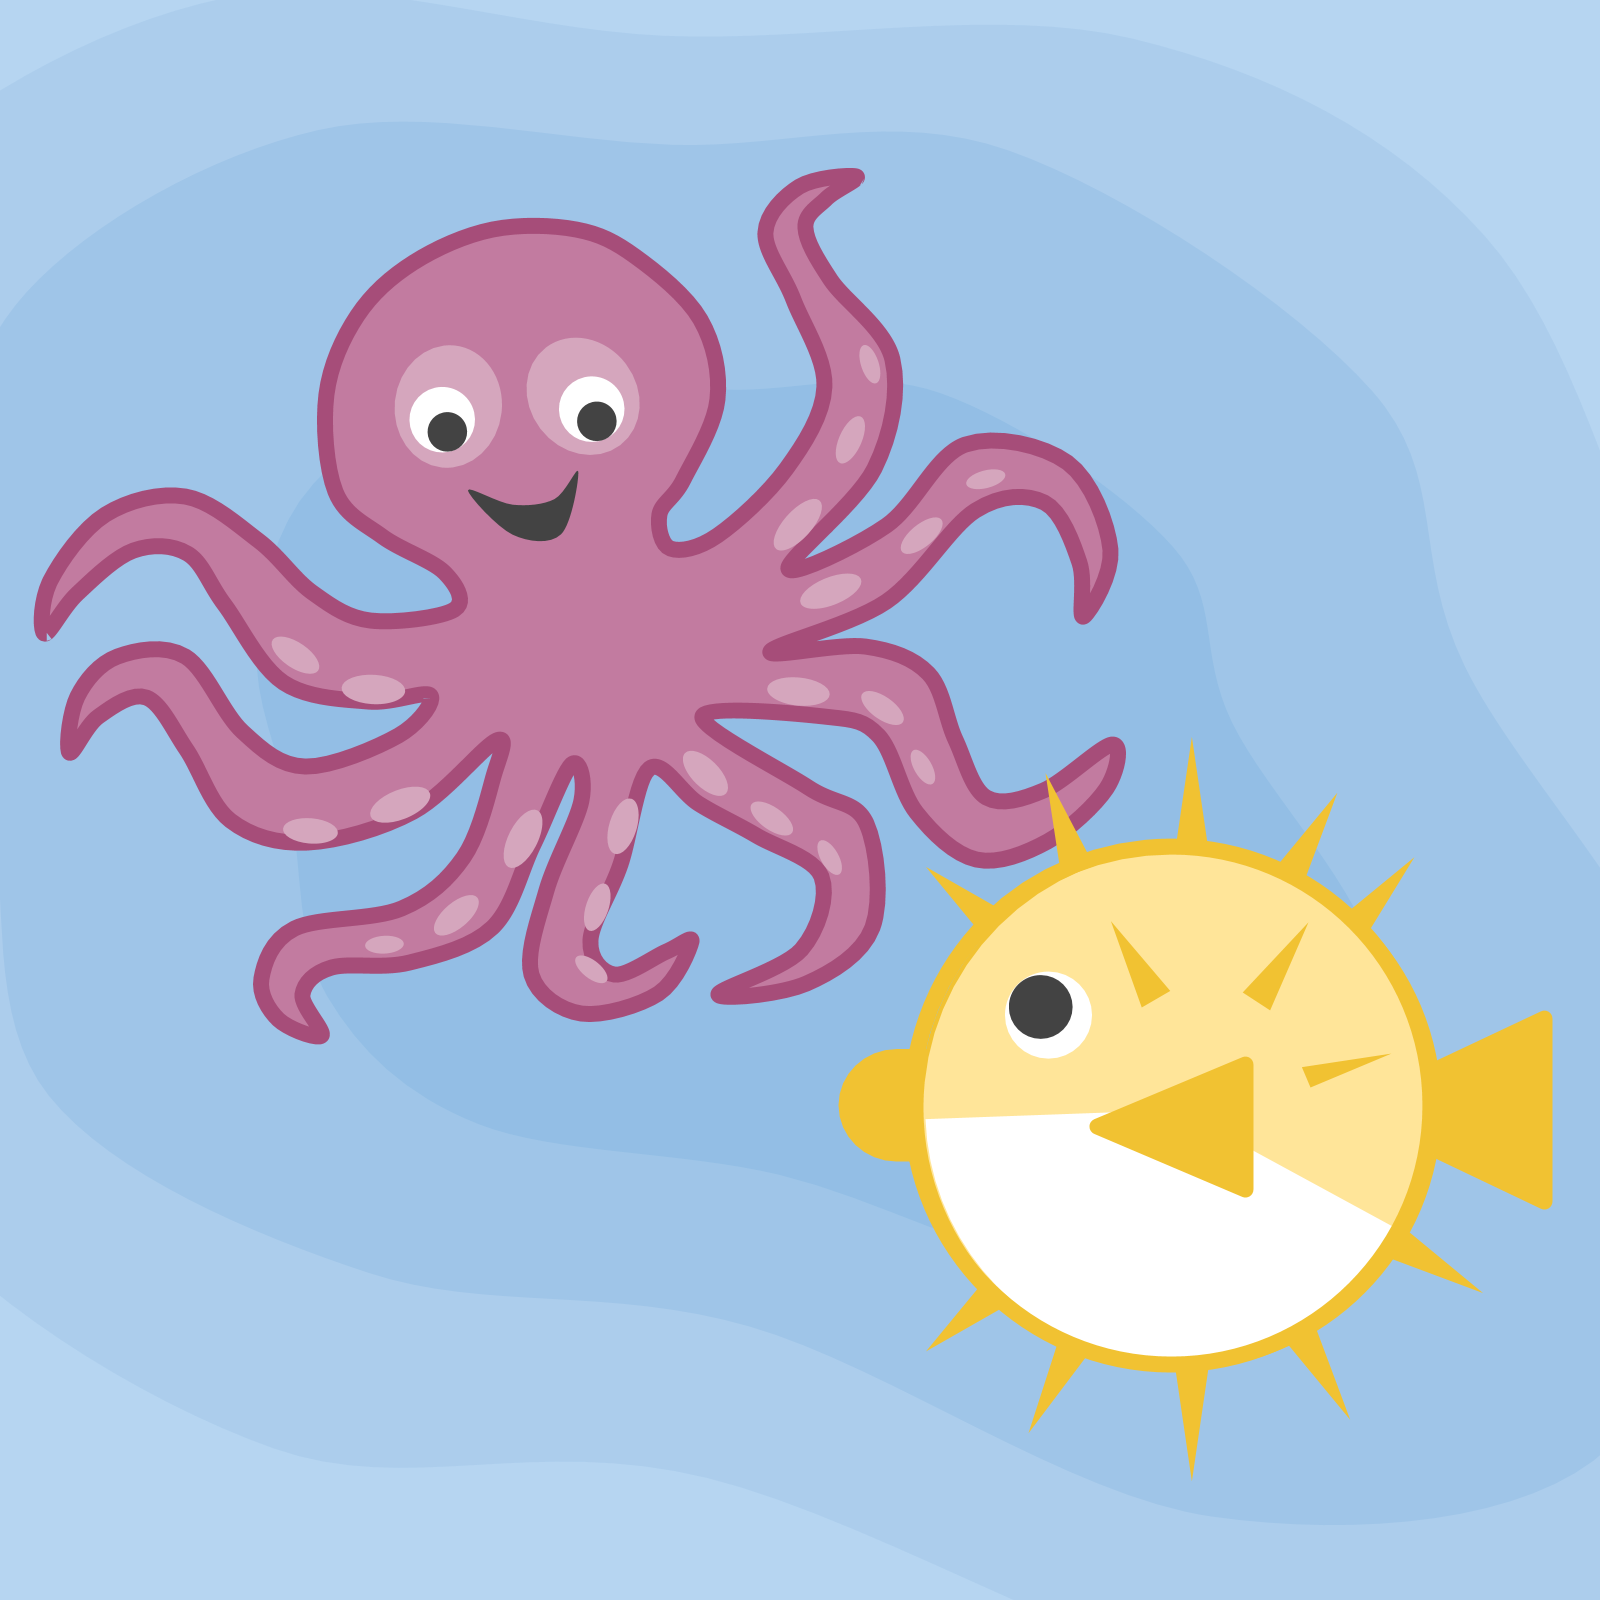 Octopus and Pufferfish